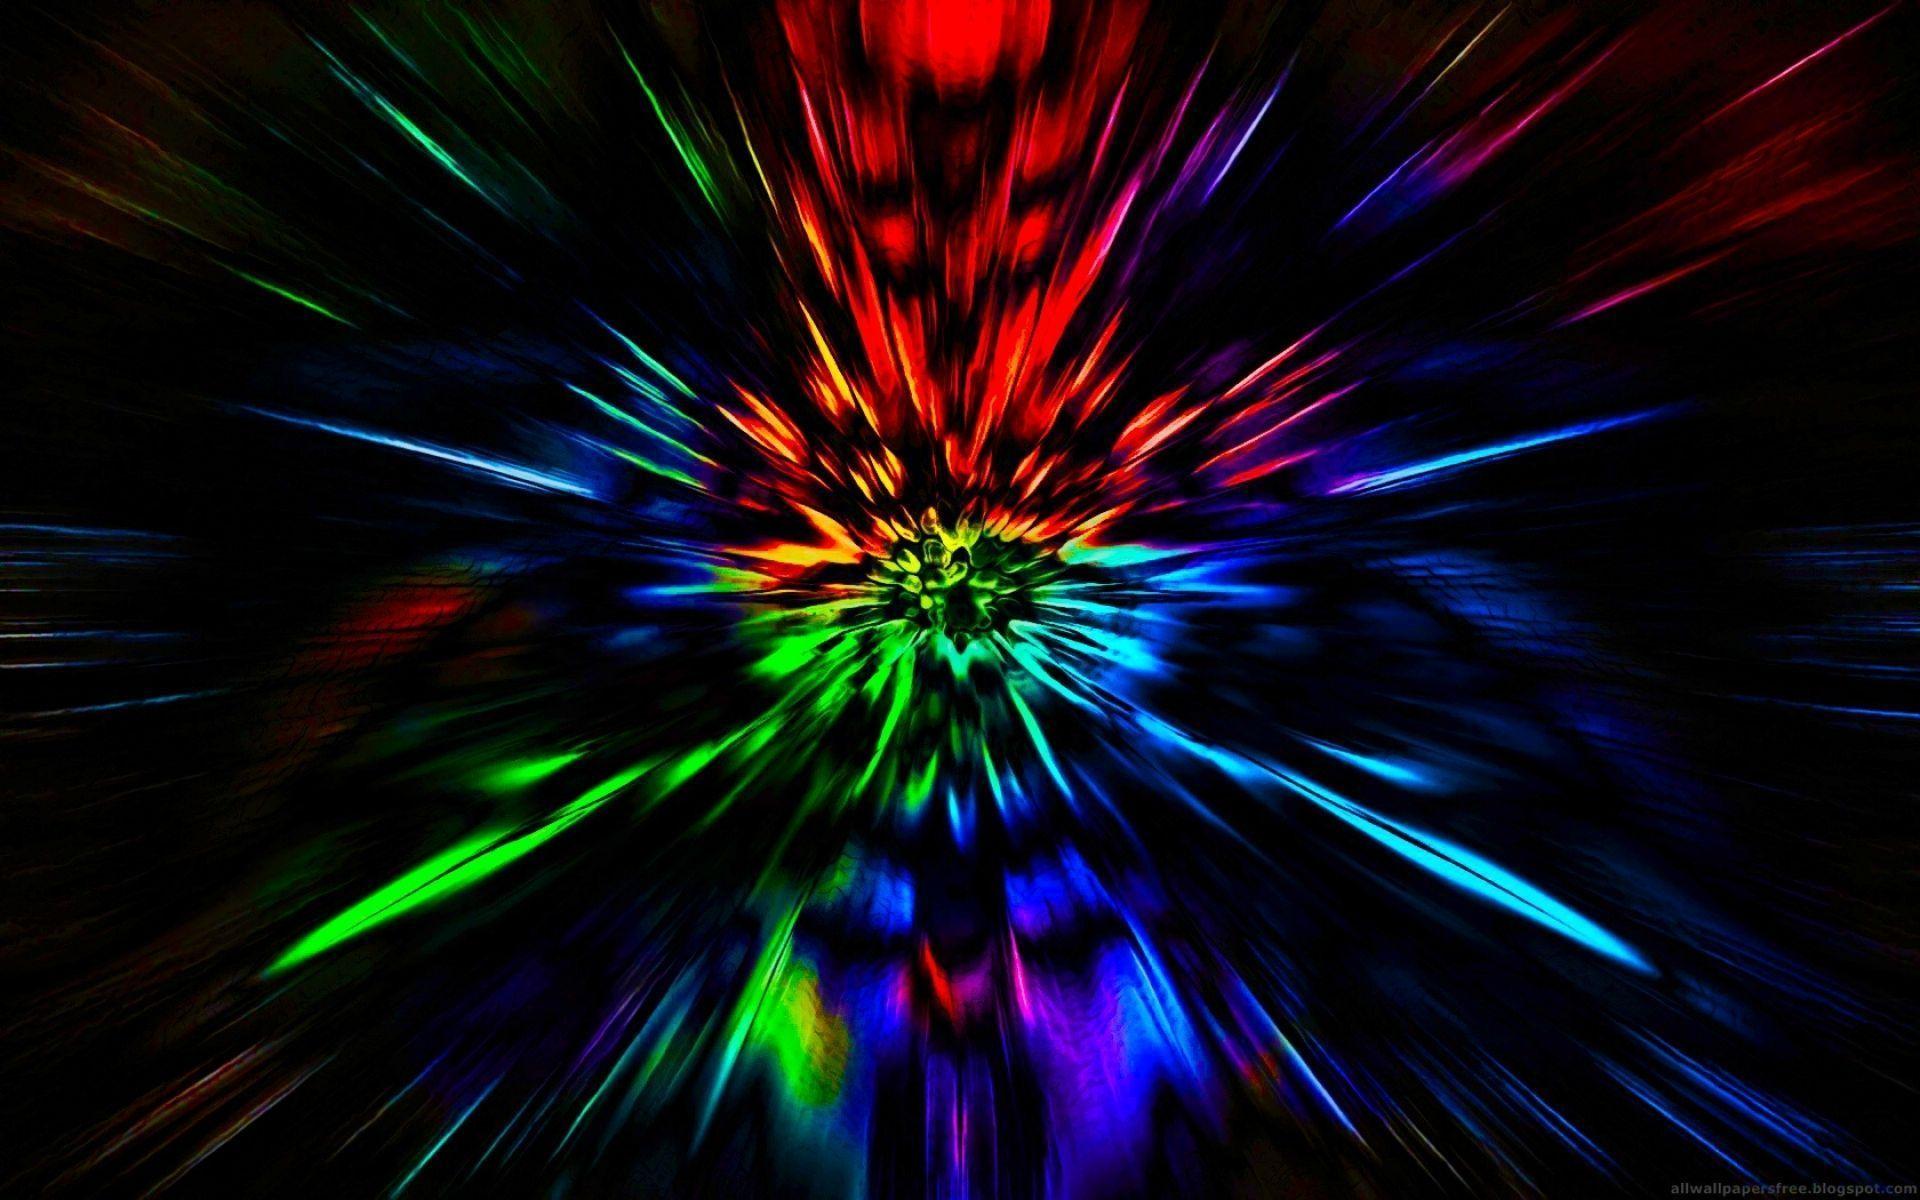 Trippy Weed Background For iPhone × Trippy iPhone. iPhone